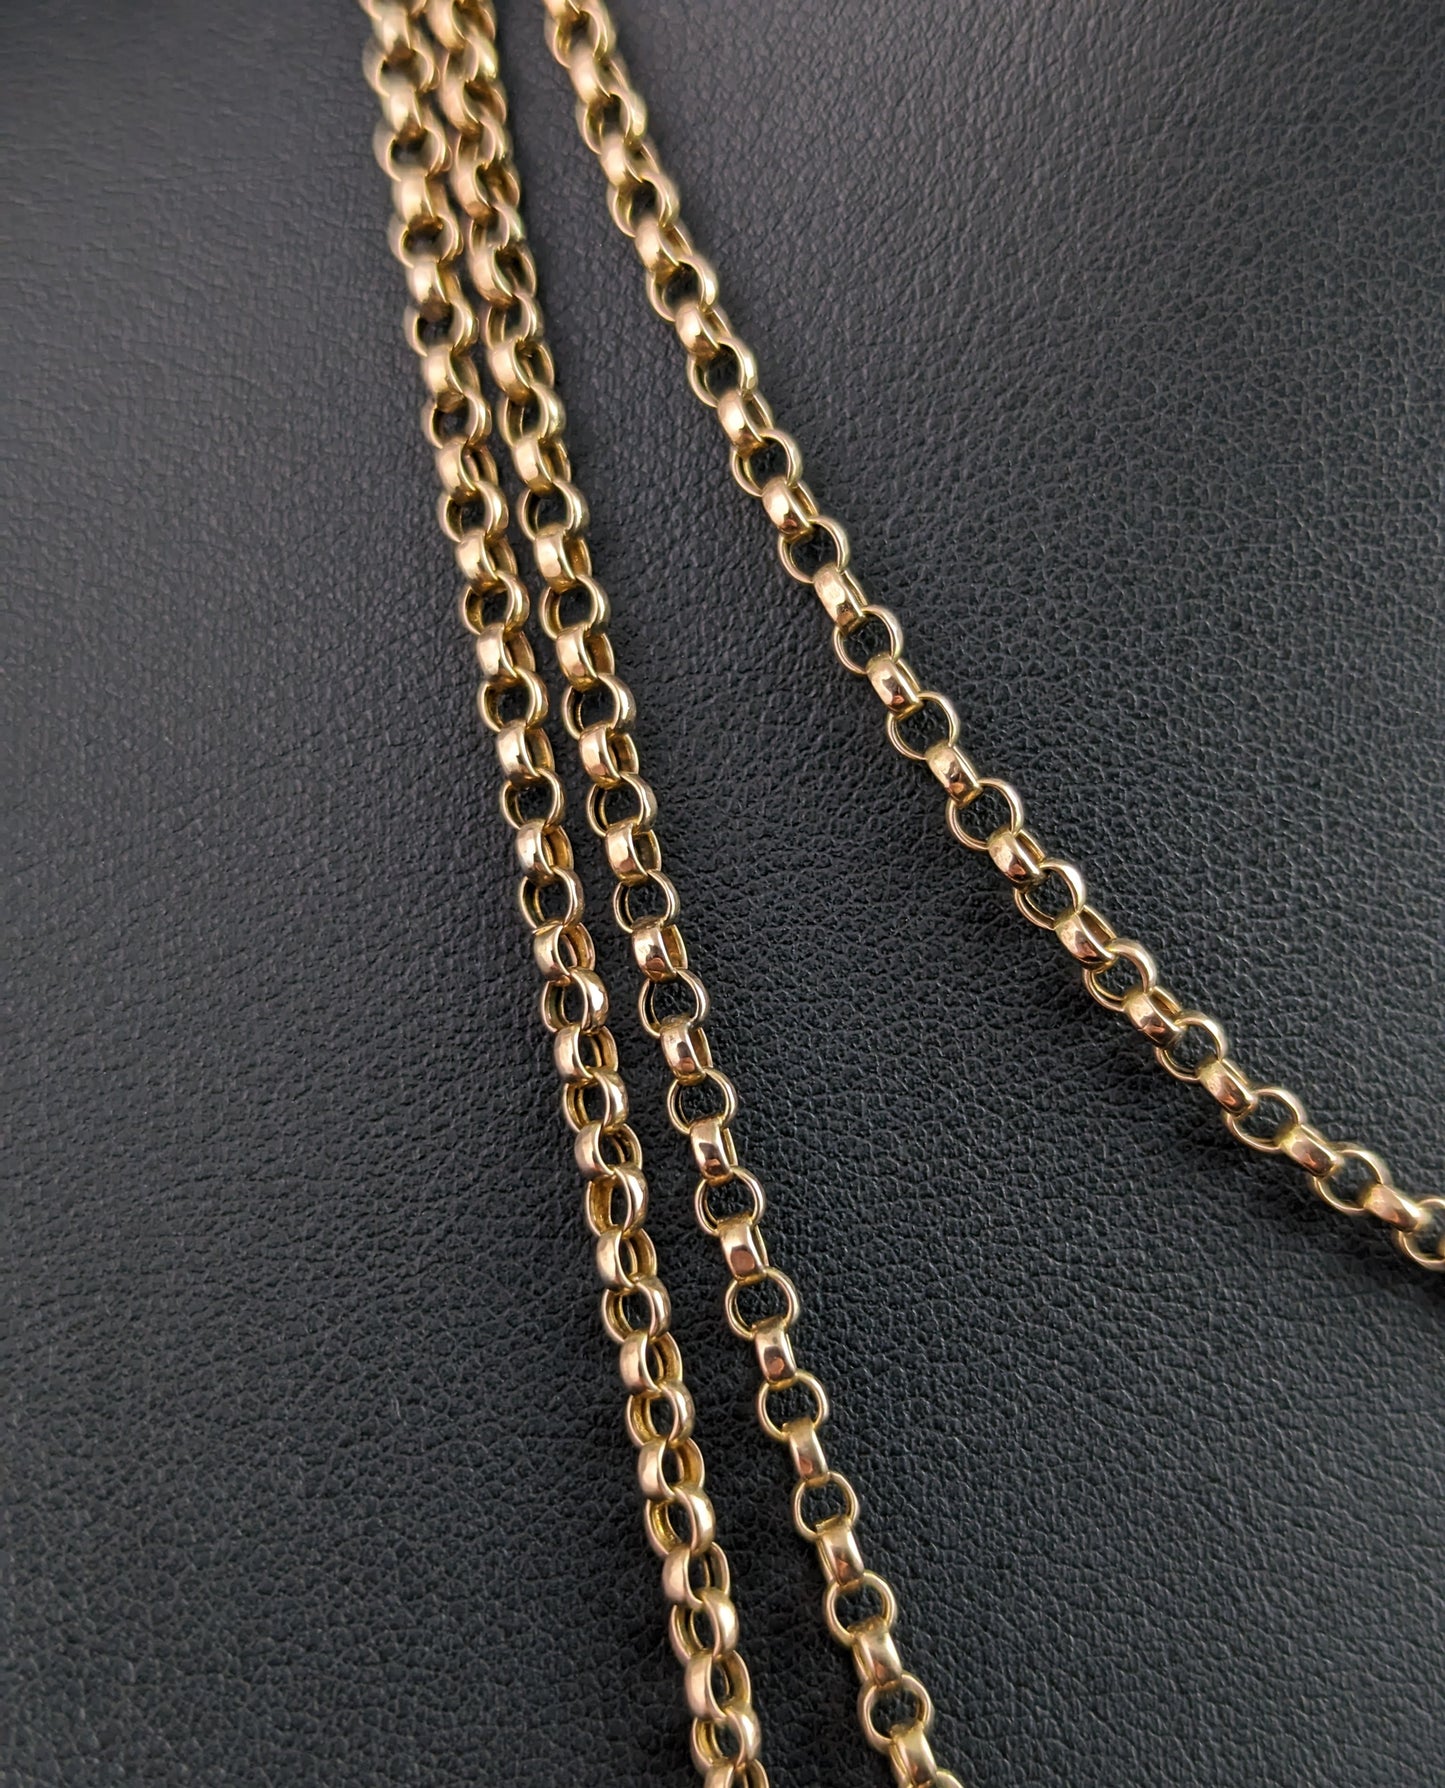 Antique 9ct gold longuard chain necklace, muff chain, Victorian, Belcher link